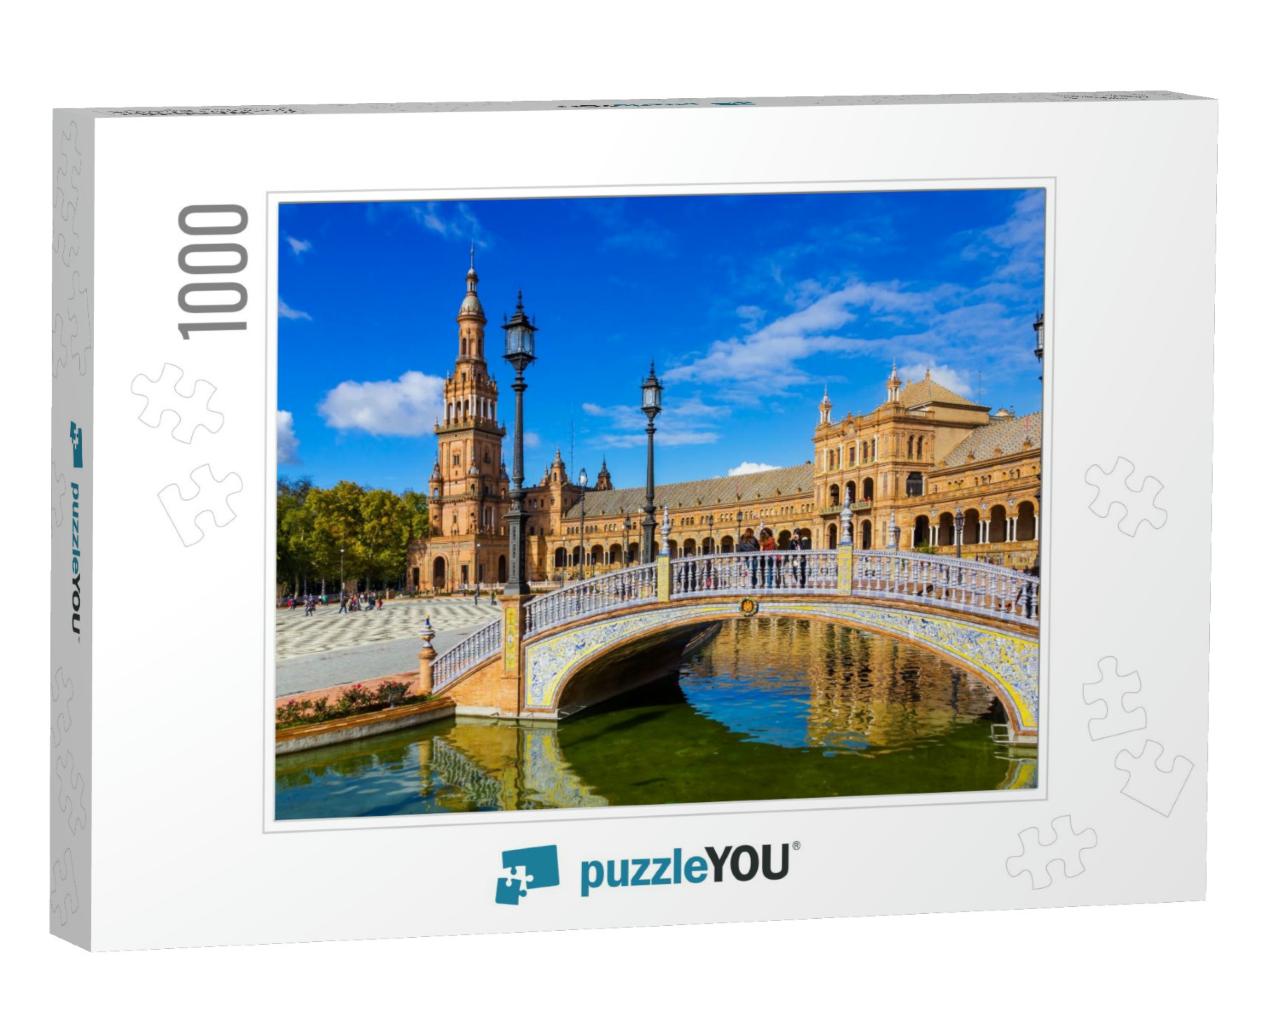 Spanish Square in Sevilla, Spain... Jigsaw Puzzle with 1000 pieces